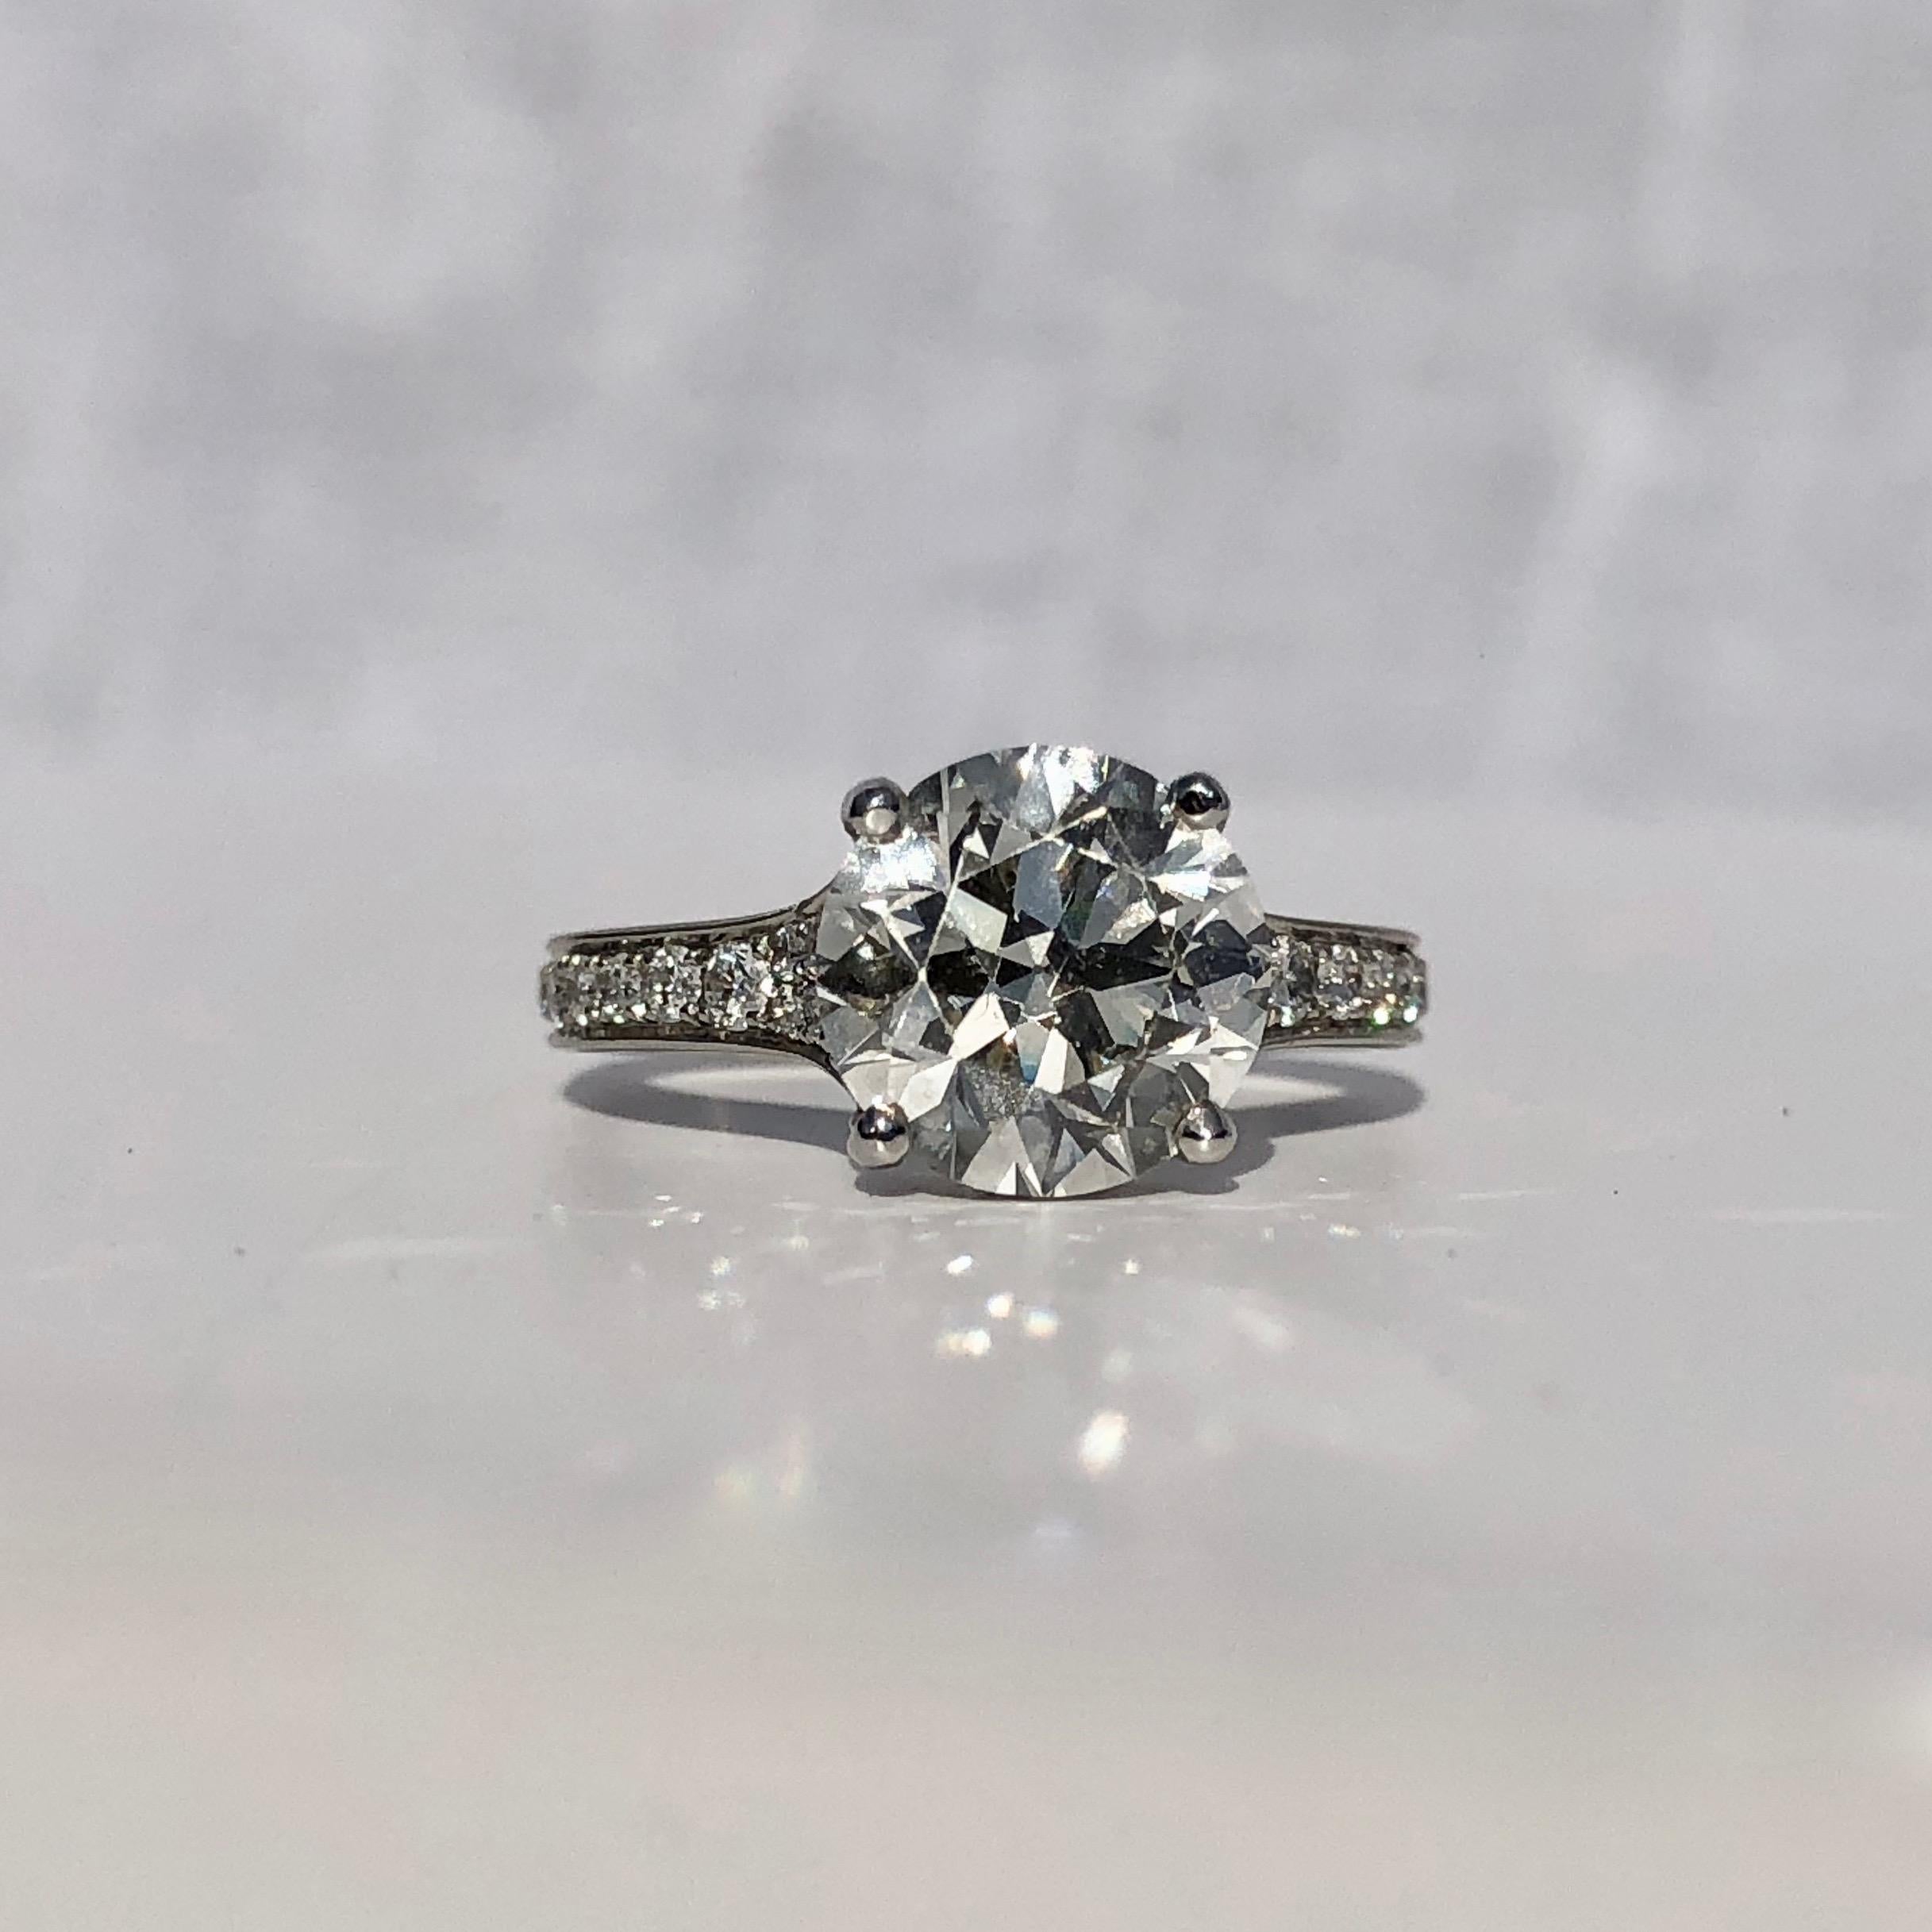 An Transitional Old Brilliant Cut Diamond Re-Set In A Bespoke Platinum Duchess Of Diamonds Mount With Stunning Diamond Enhanced Shoulders and Under Bezel Secret Diamond Halo.

Total Diamond Weight 3.41ct

I Colour VS Clarity Stone of 2.85ct Set In A